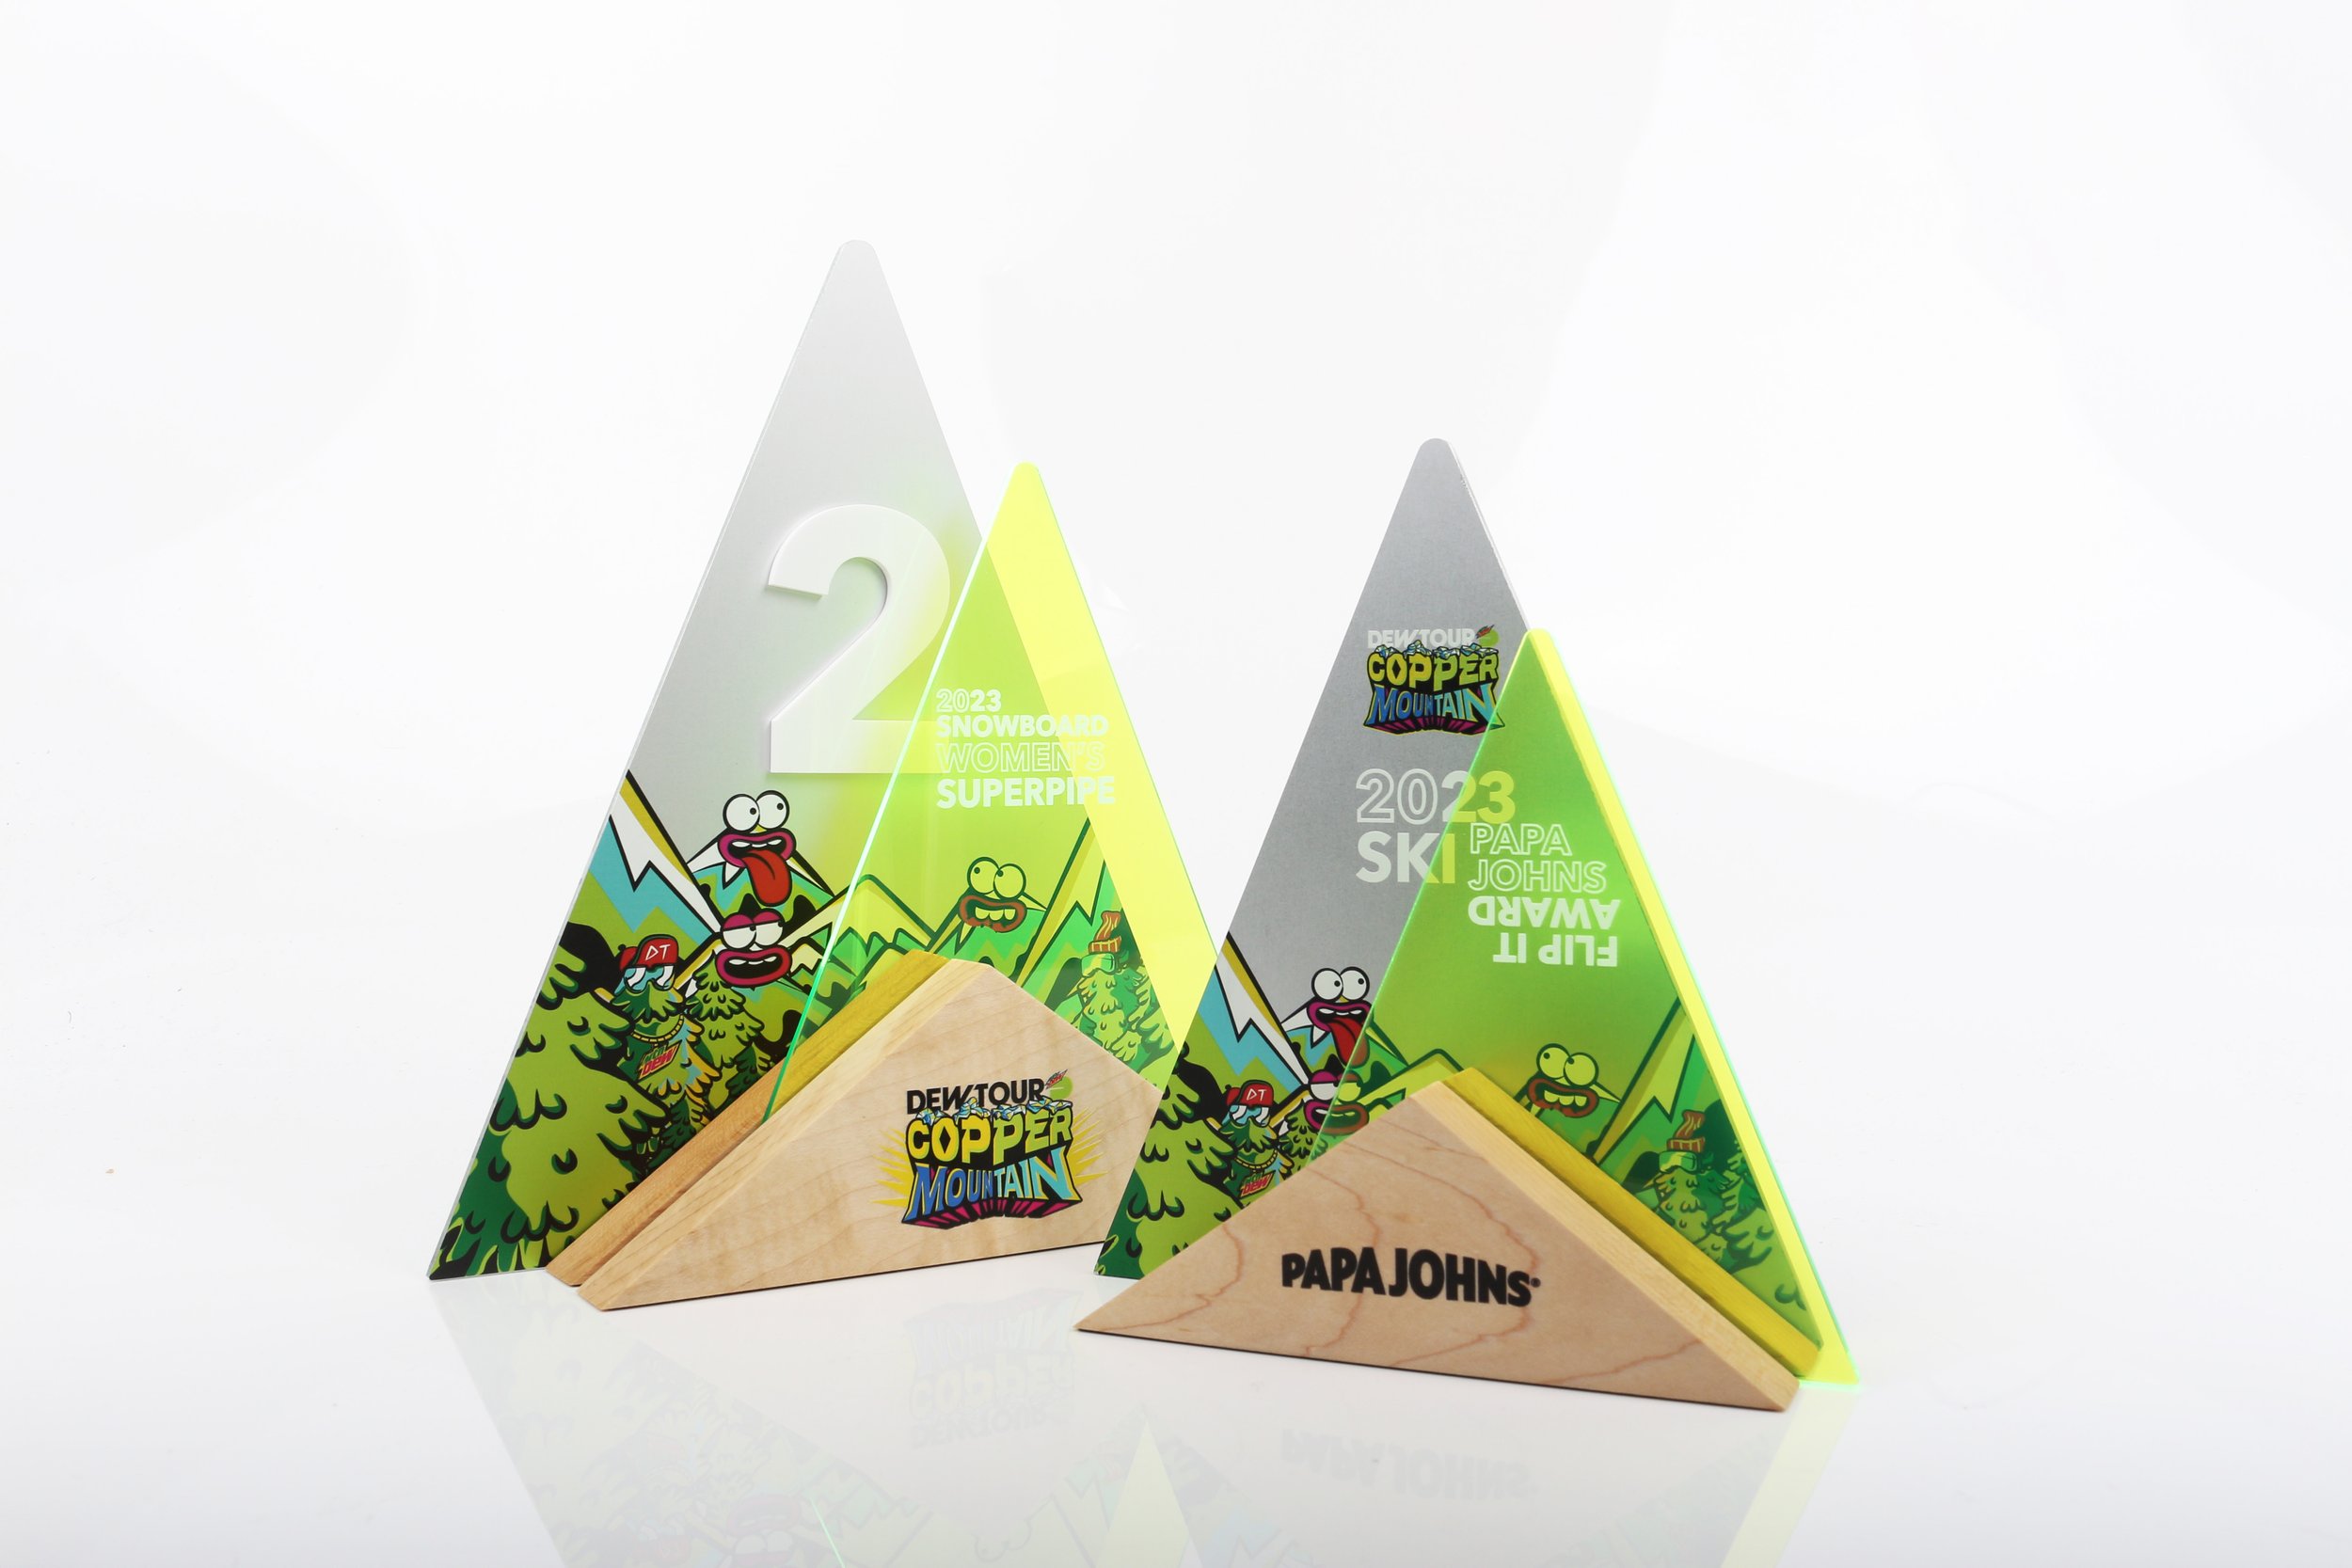 Winter Dew Tour 2023 custom awards and trophies 